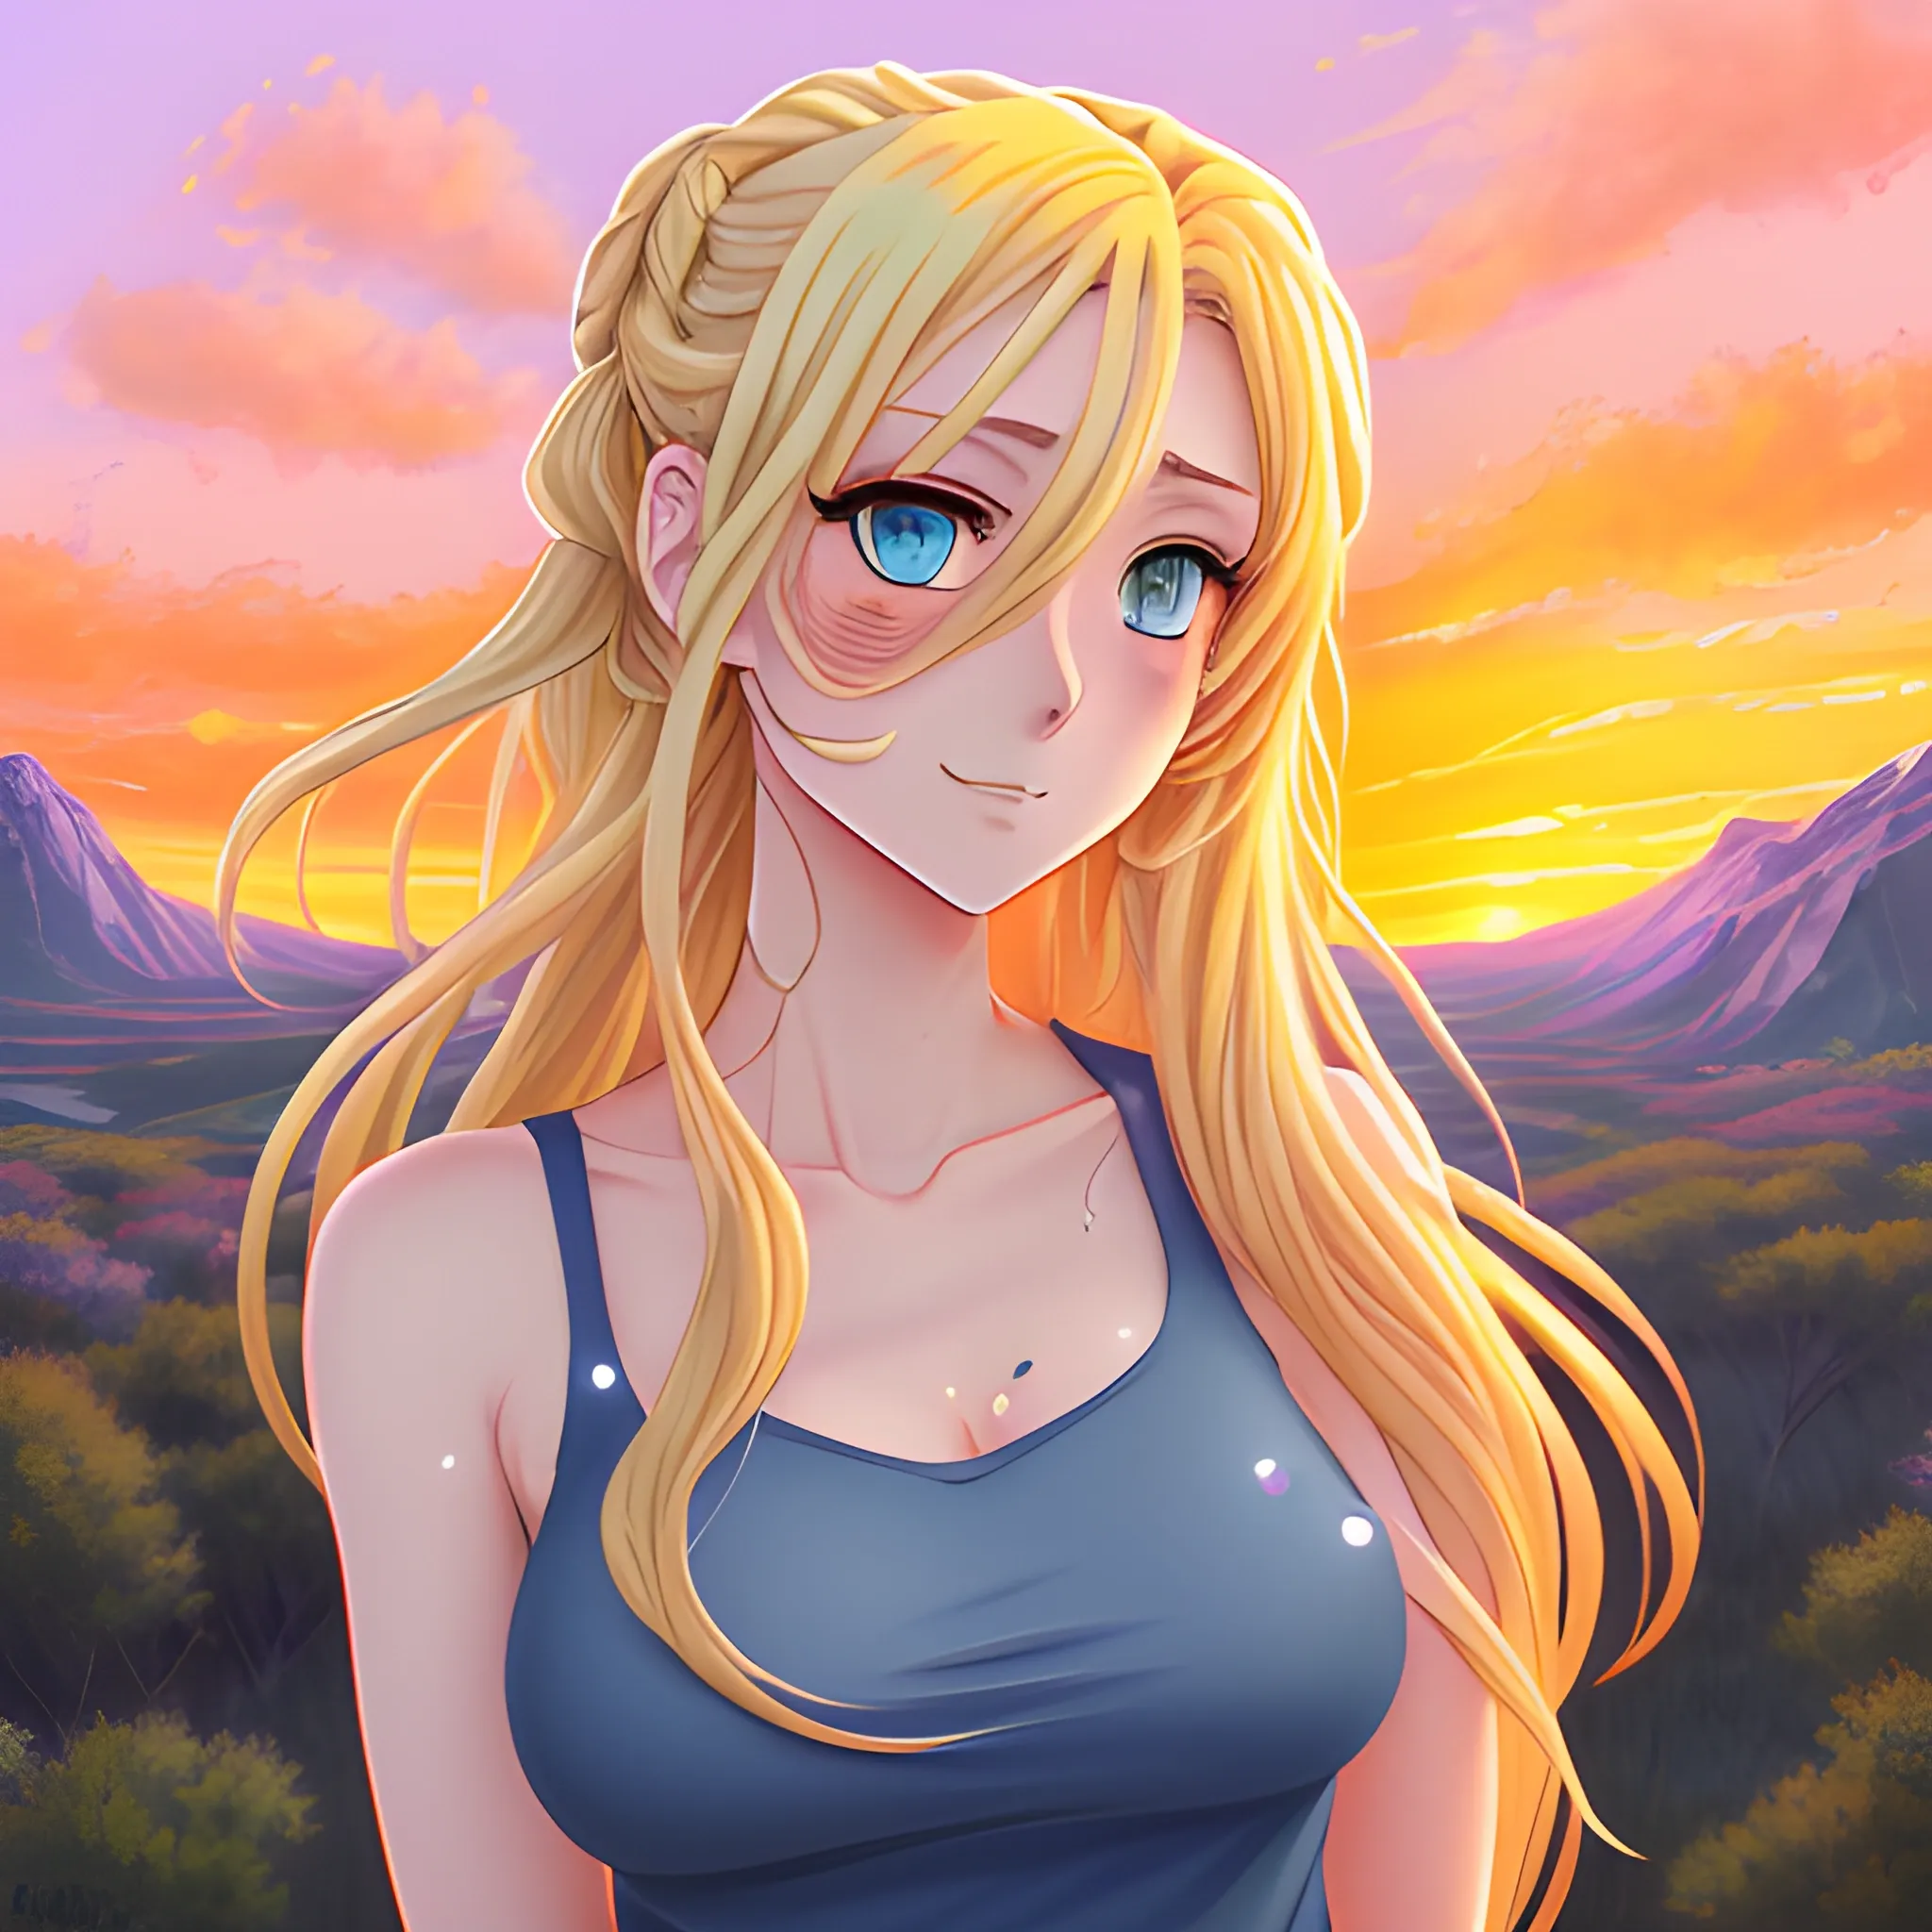 Anime art, portrait of cute young girl , semi-long blond hair in motion, rosy cheeks, with a tattoo on the top of his cheek : 19h19, tender face, big watery blue eyes, looks sad face, tilted face, wearing a tank top not revealing, magical and luminous aura around herself, light cinematographic, volumetric light, highly detailed, magic fantasy orange sky in background with sunset, stars and rocky mountains in beginning of dusk, digital painting, 

size: 3048x3048